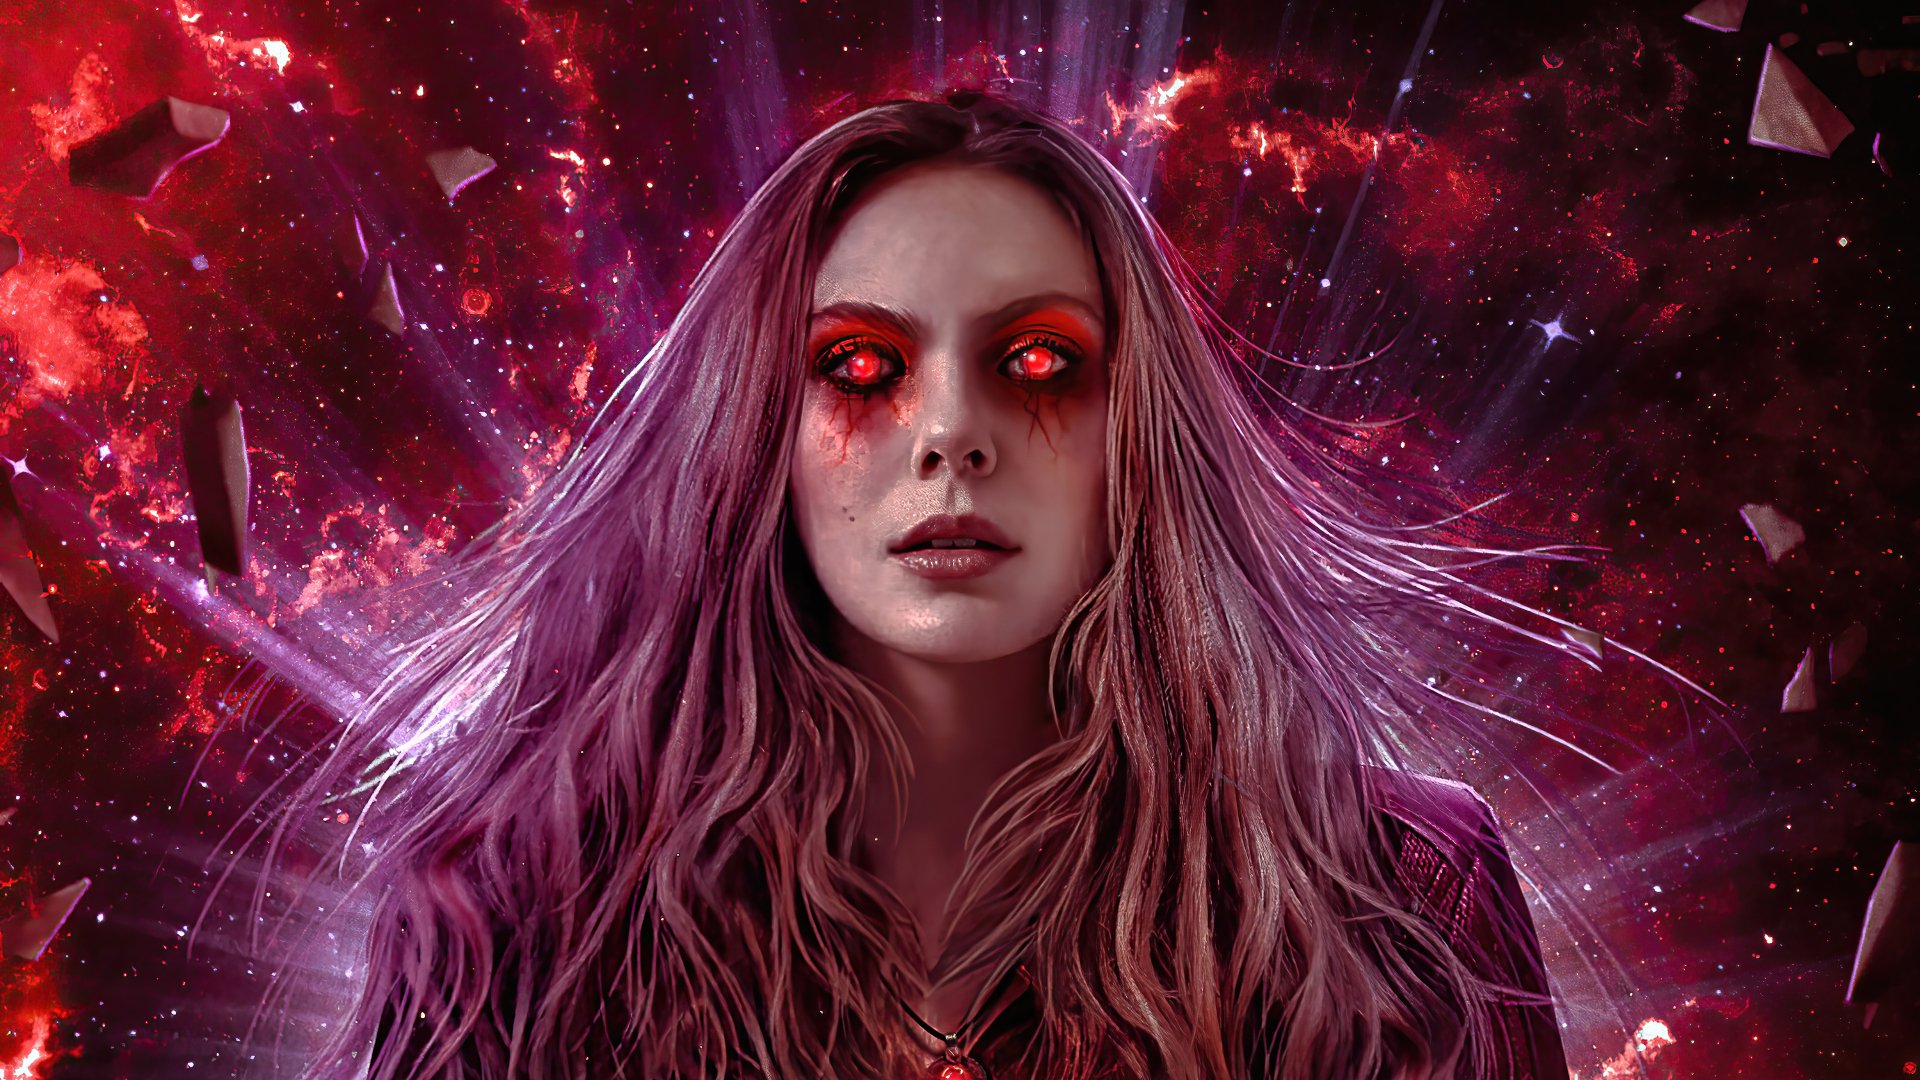 Download Scarlet Witch Tv Show Wandavision 4k Ultra Hd Wallpaper By Carpaa 